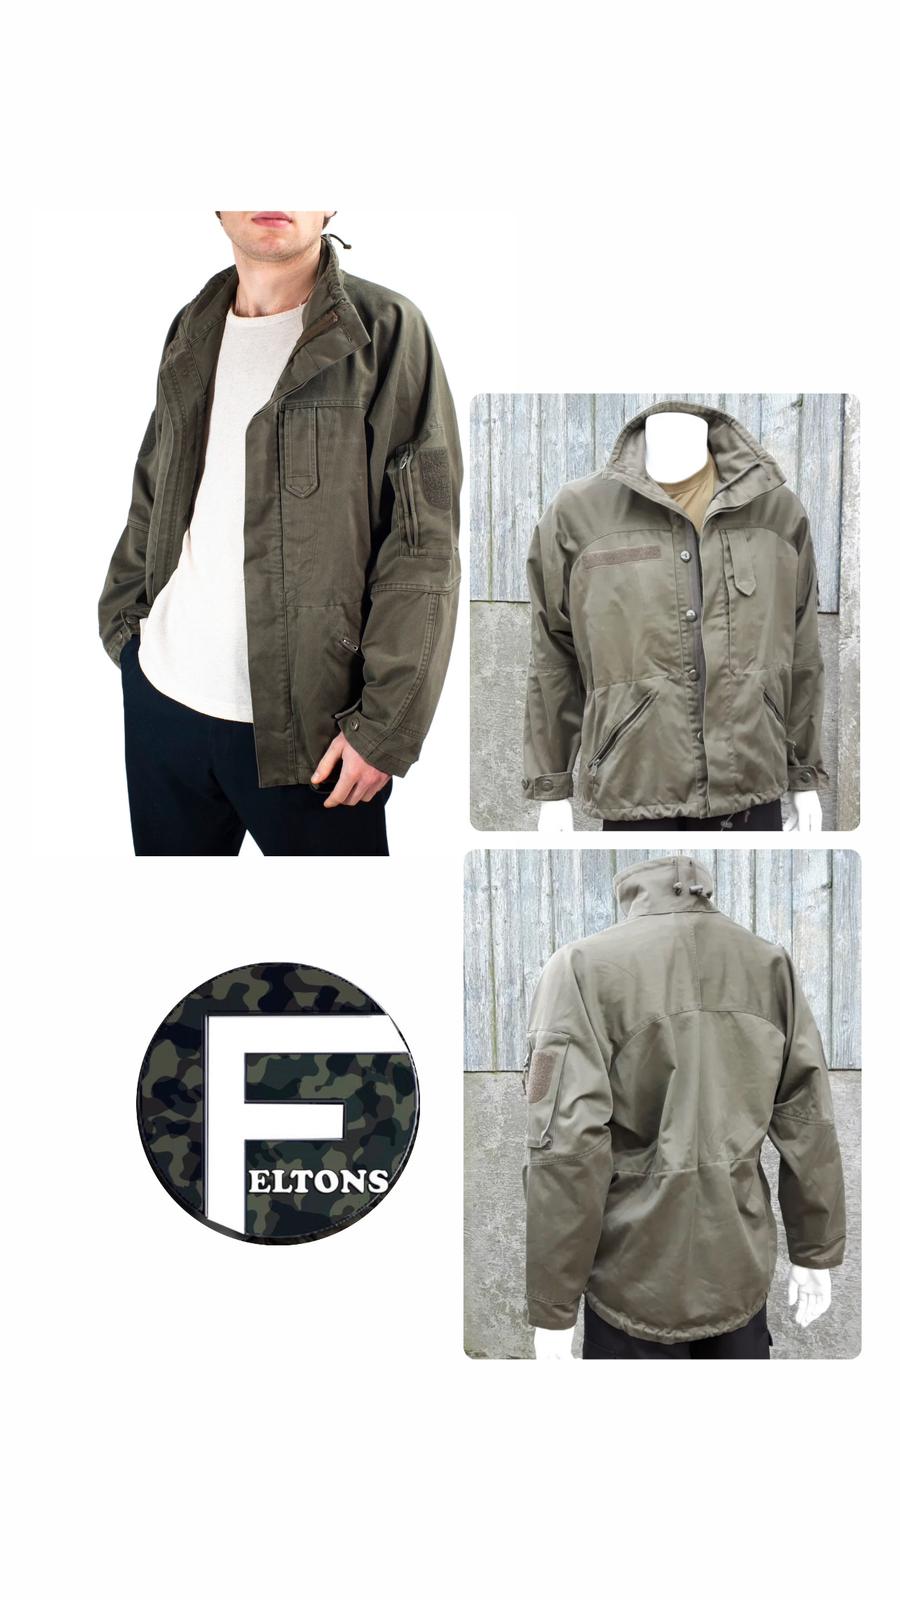 This Men's Army Jacket is a Genuine Austrian Army Combat Jacket. It is full of features which makes it a popular jacket with hikers and trekkers, as well as just being a very stylish men's army coat. The innov